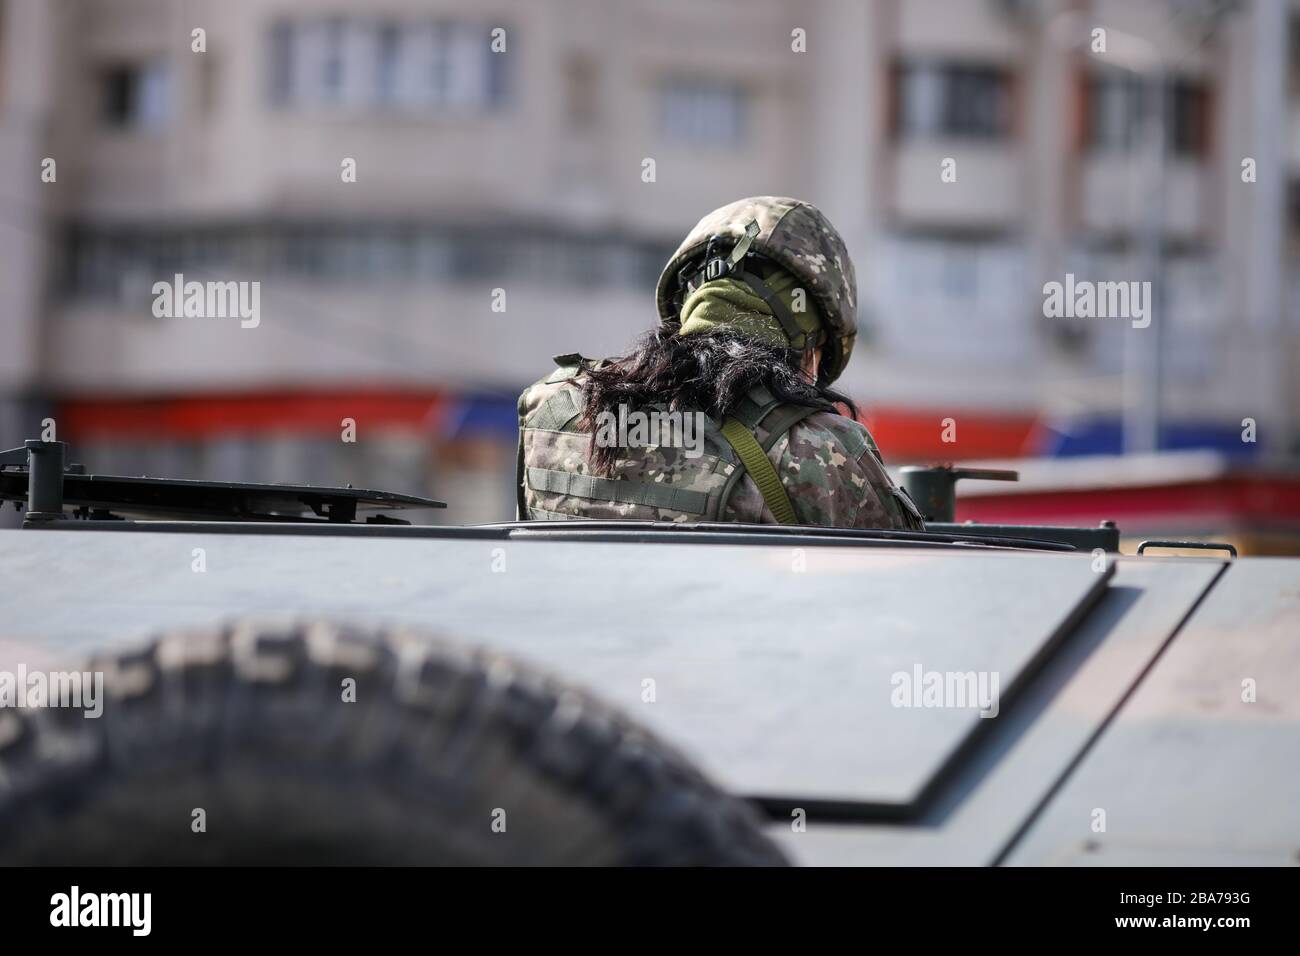 Bucharest, Romania - March 25, 2020: Romanian female soldiers in an armored vehicle. Stock Photo